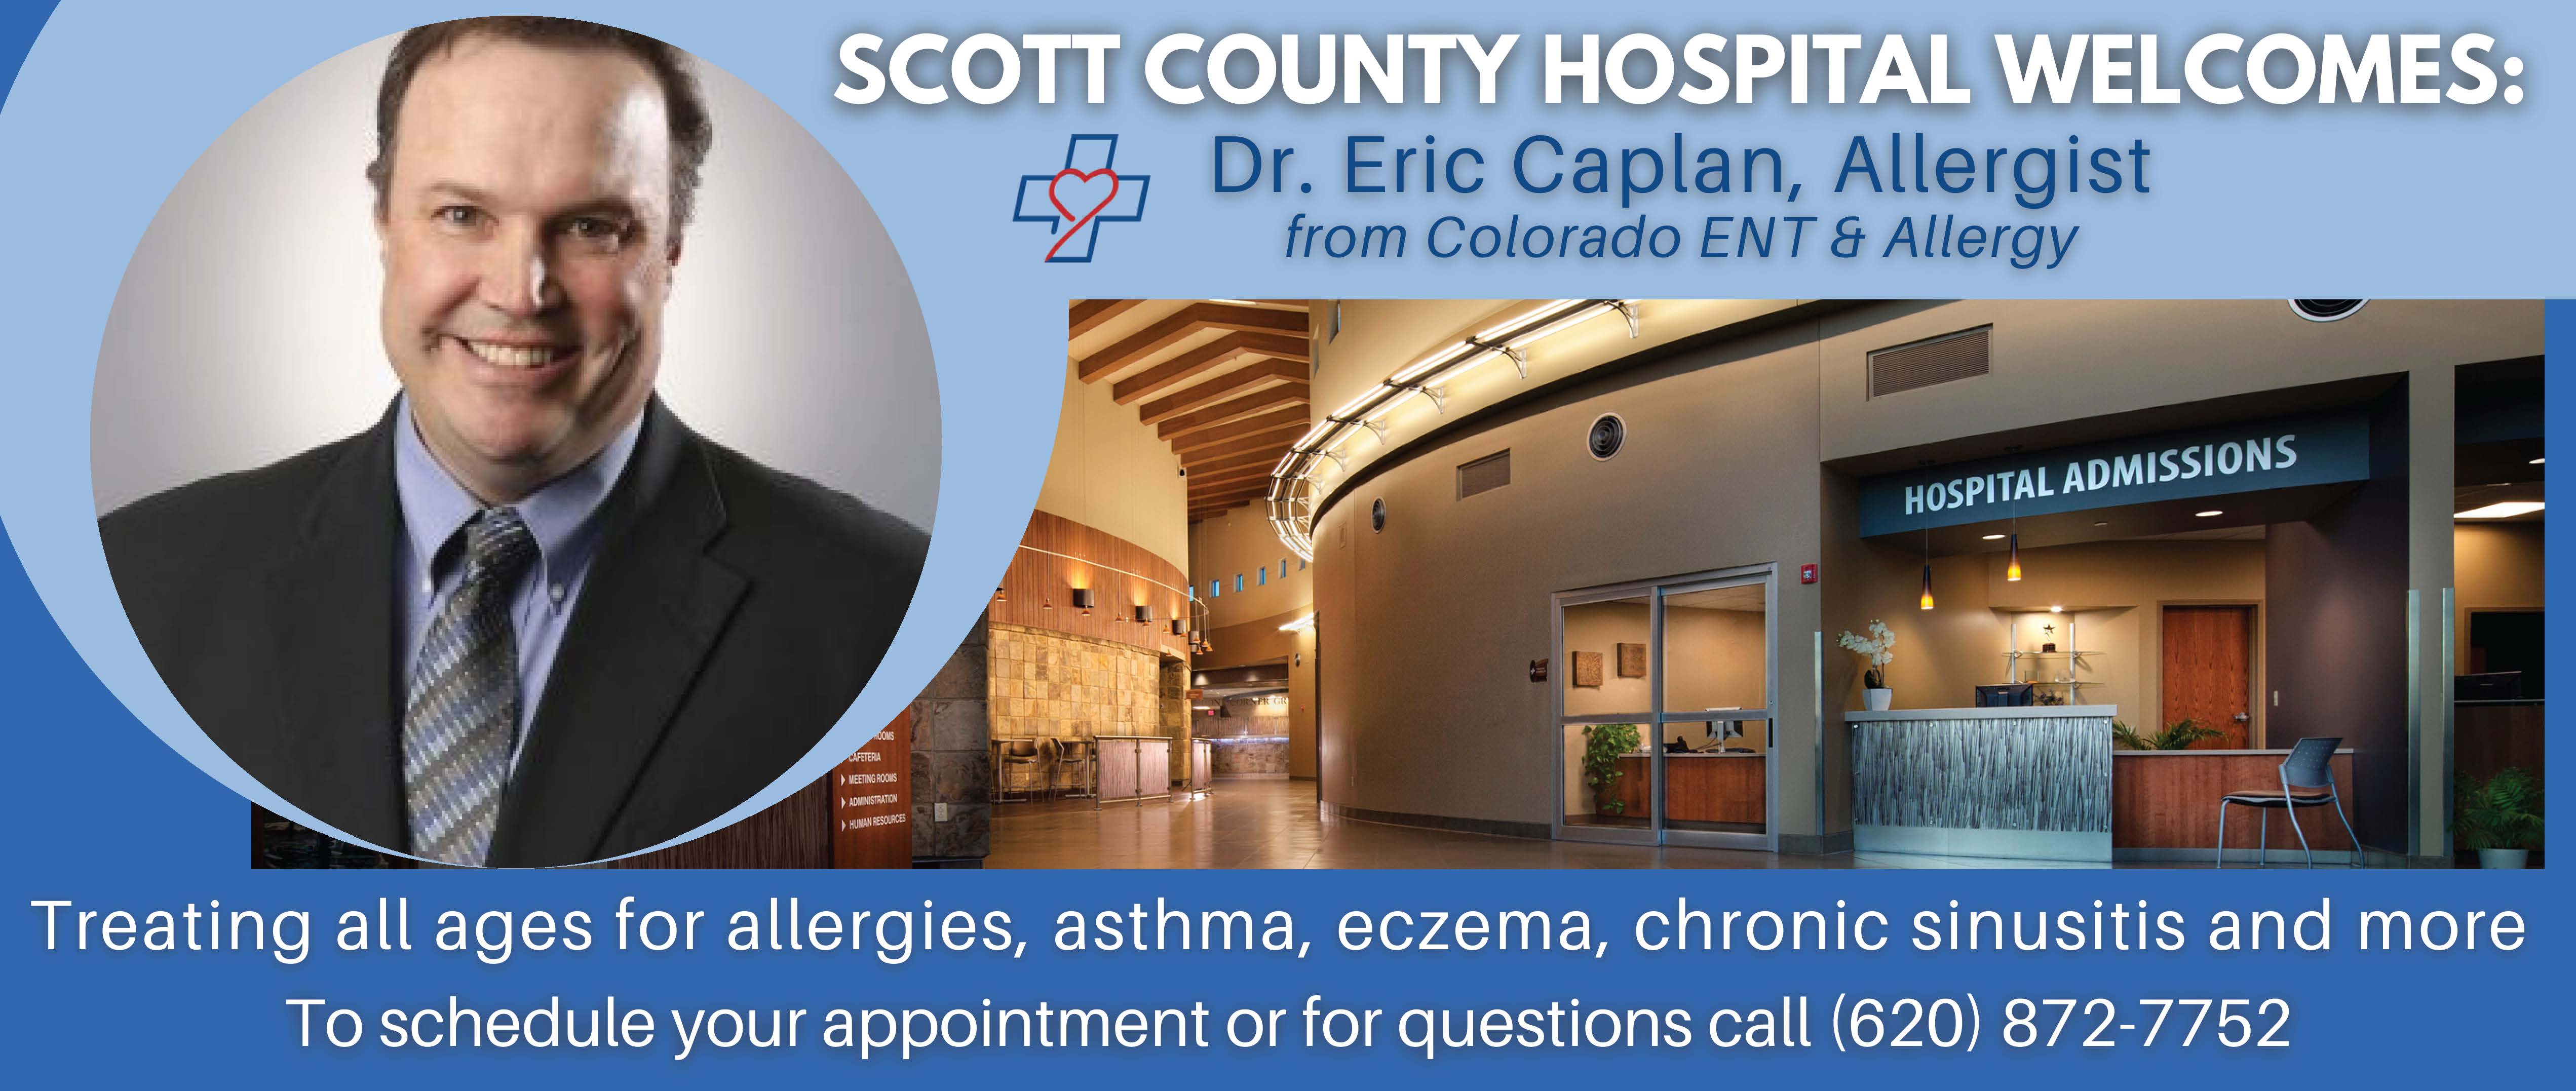 Welcoming Dr. Eric Caplan, Allergist
Treating all ages for allergies, asthma, eczema, chronic sinusitis and more. Appointments or Questions? Call (620)872-7752